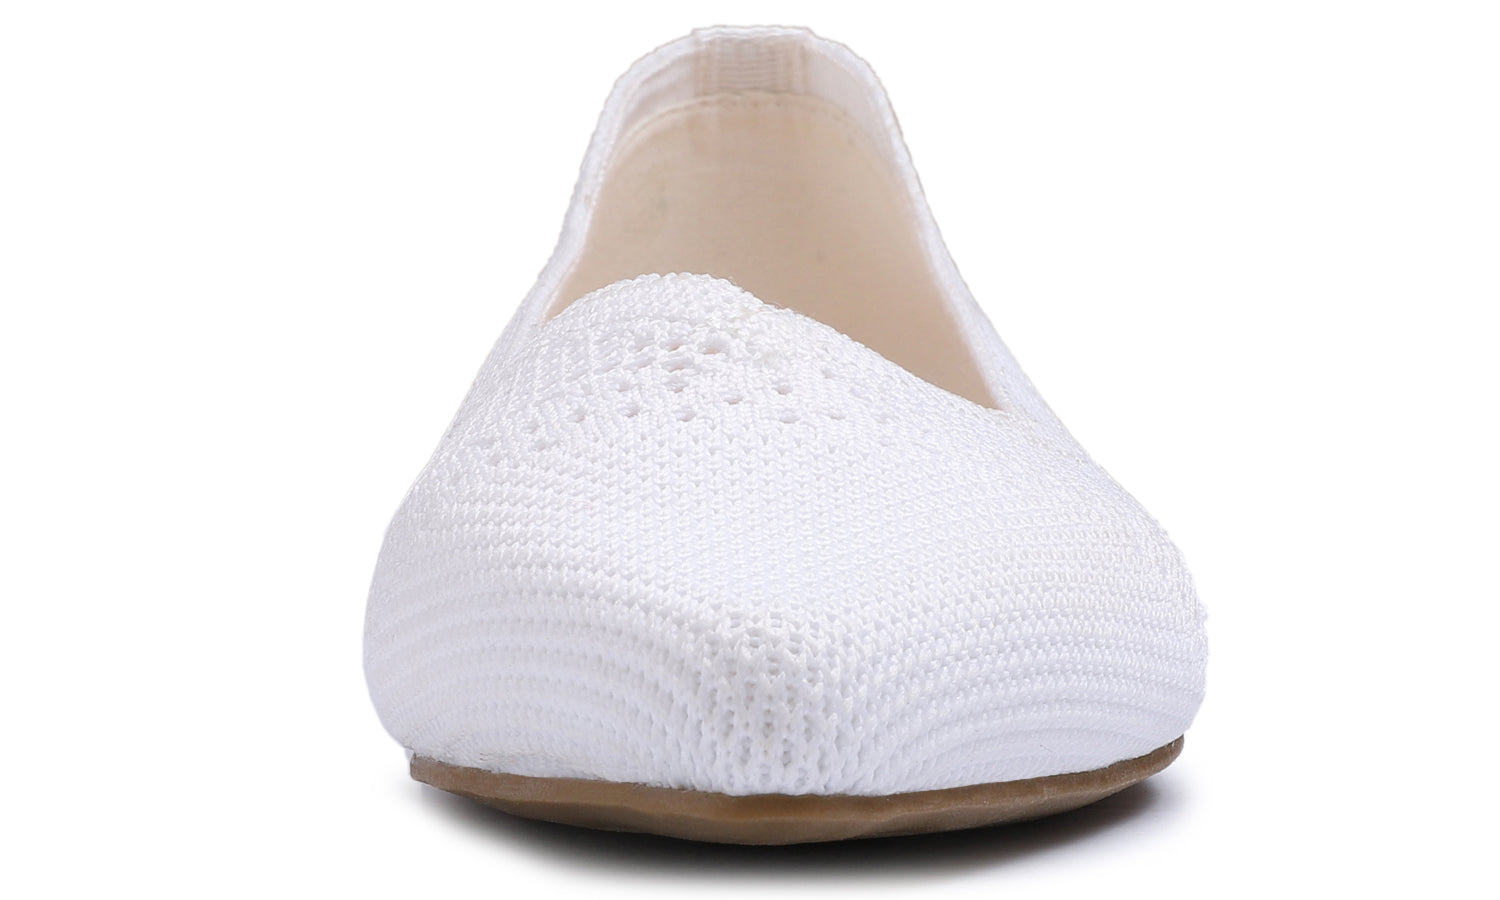 Feversole Women's Woven Fashion Breathable Knit Flat Shoes Pointed White